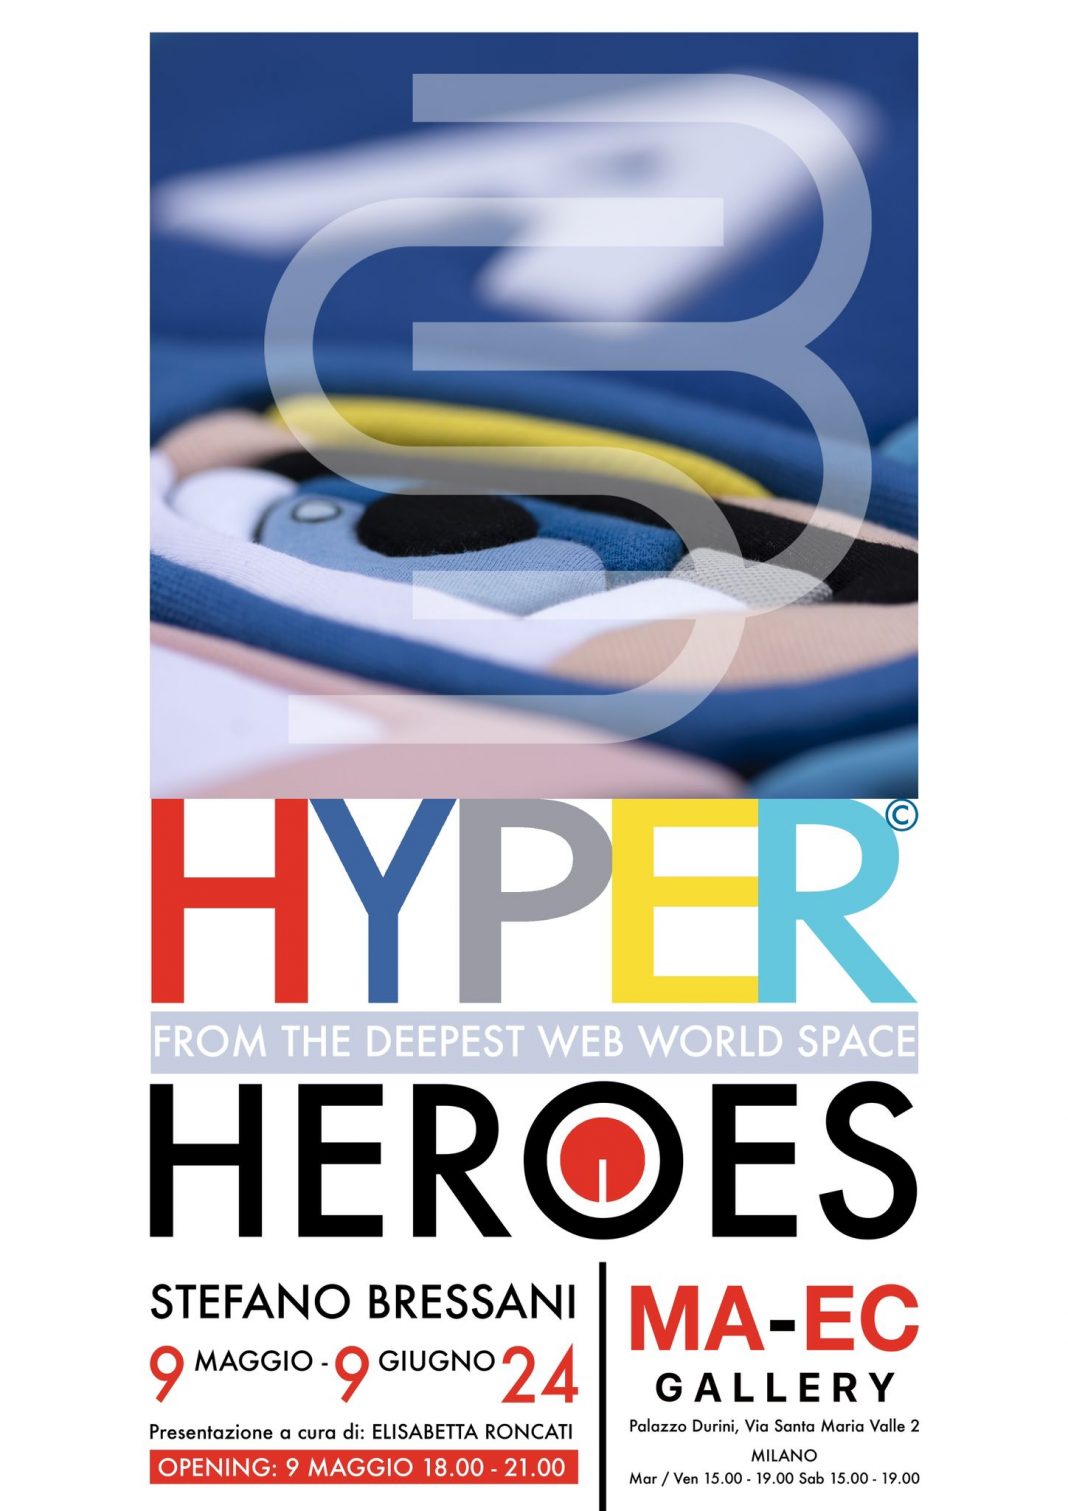 Stefano Bressani – HYPER HEROES. From the deepest web world spacehttps://www.exibart.com/repository/media/formidable/11/img/5a0/Locandina-Mostra-Hyper-Heroes-1068x1511.jpg